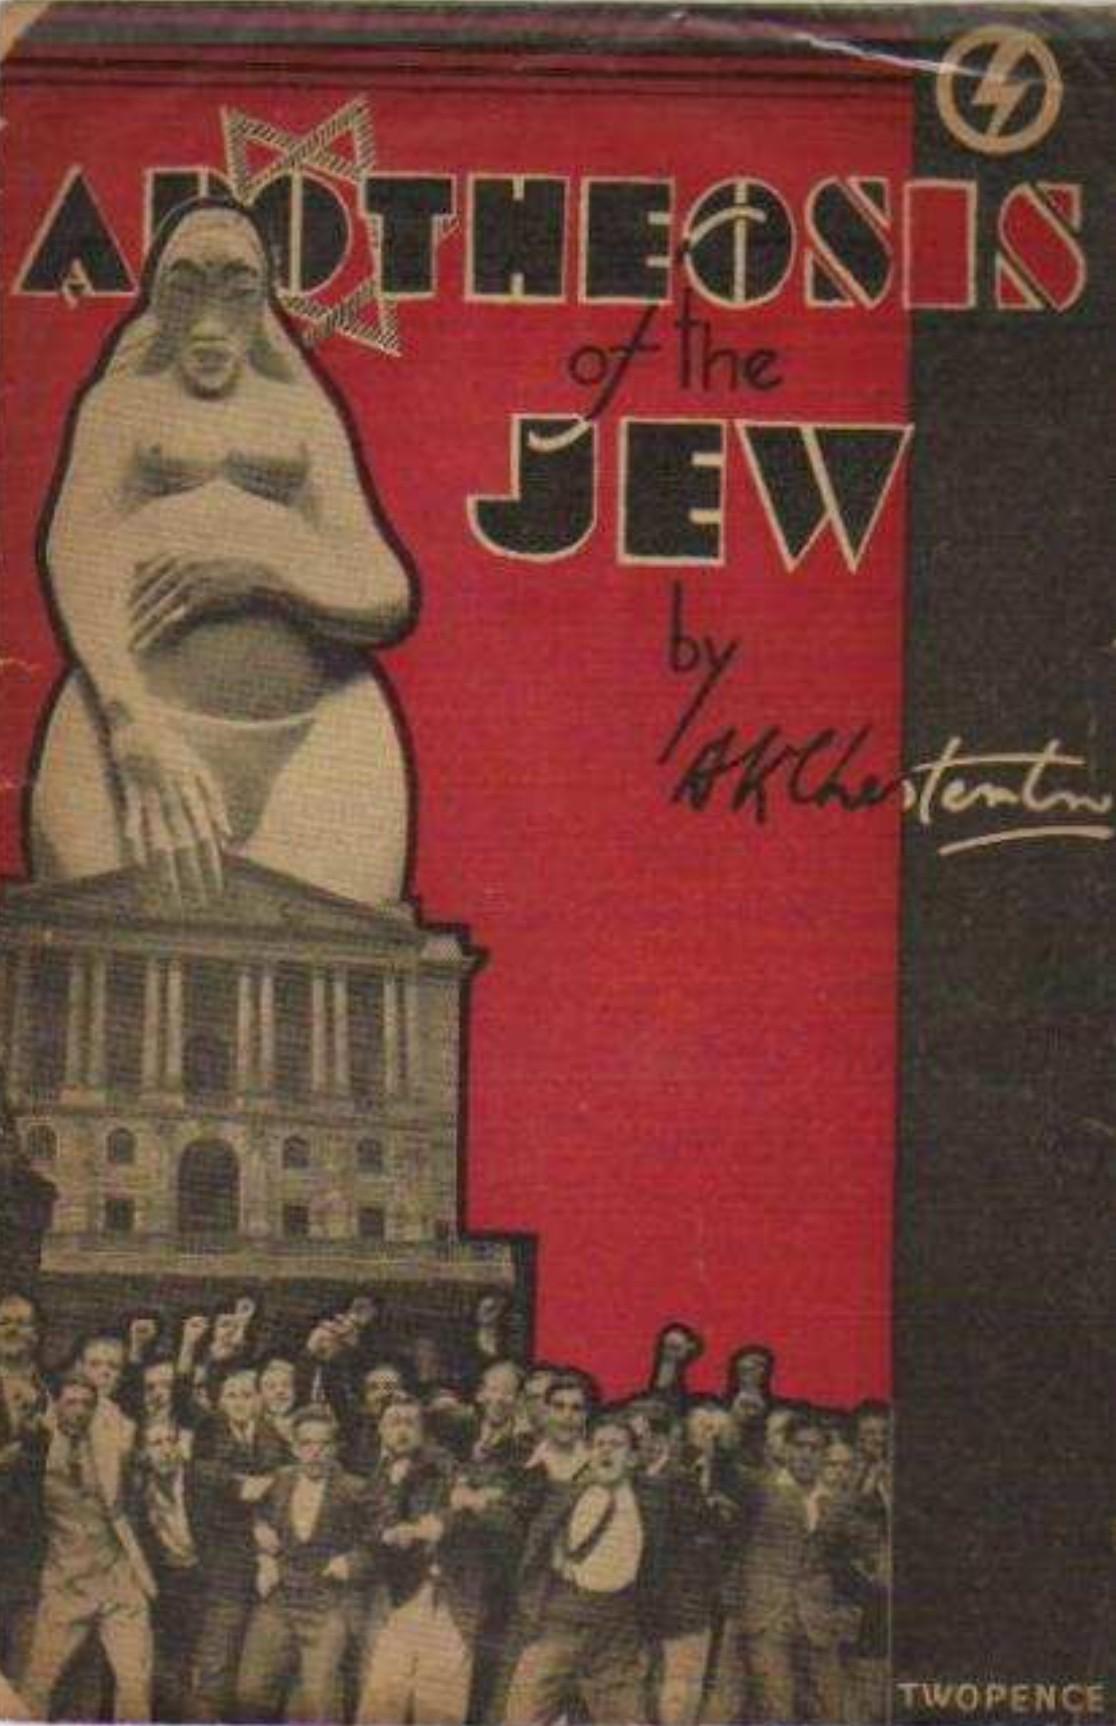 Apotheosis of the Jew: From Ghetto to Park Lane (1937) by Arthur Kenneth Chesterton